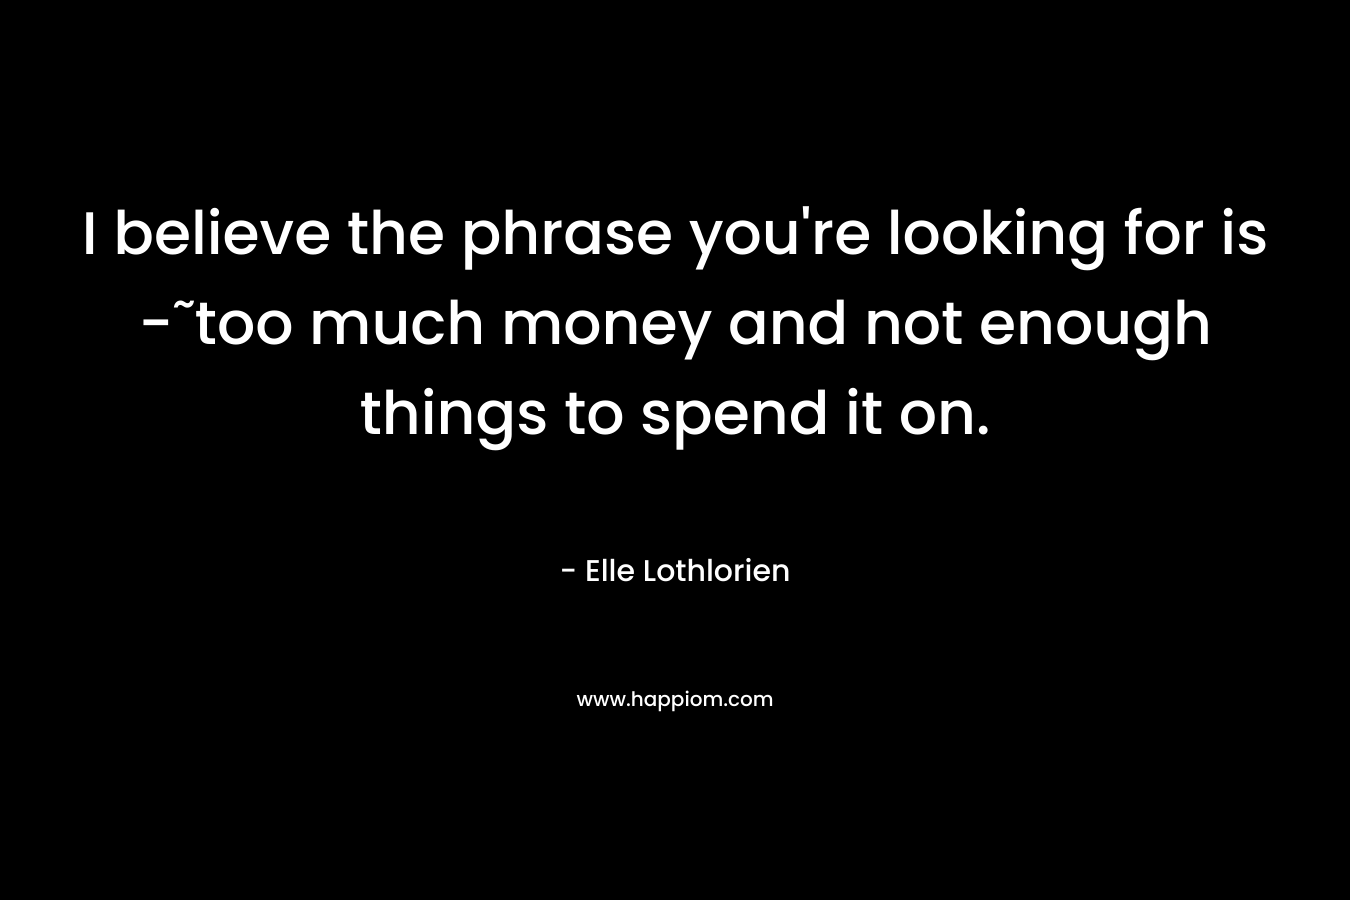 I believe the phrase you're looking for is -˜too much money and not enough things to spend it on.